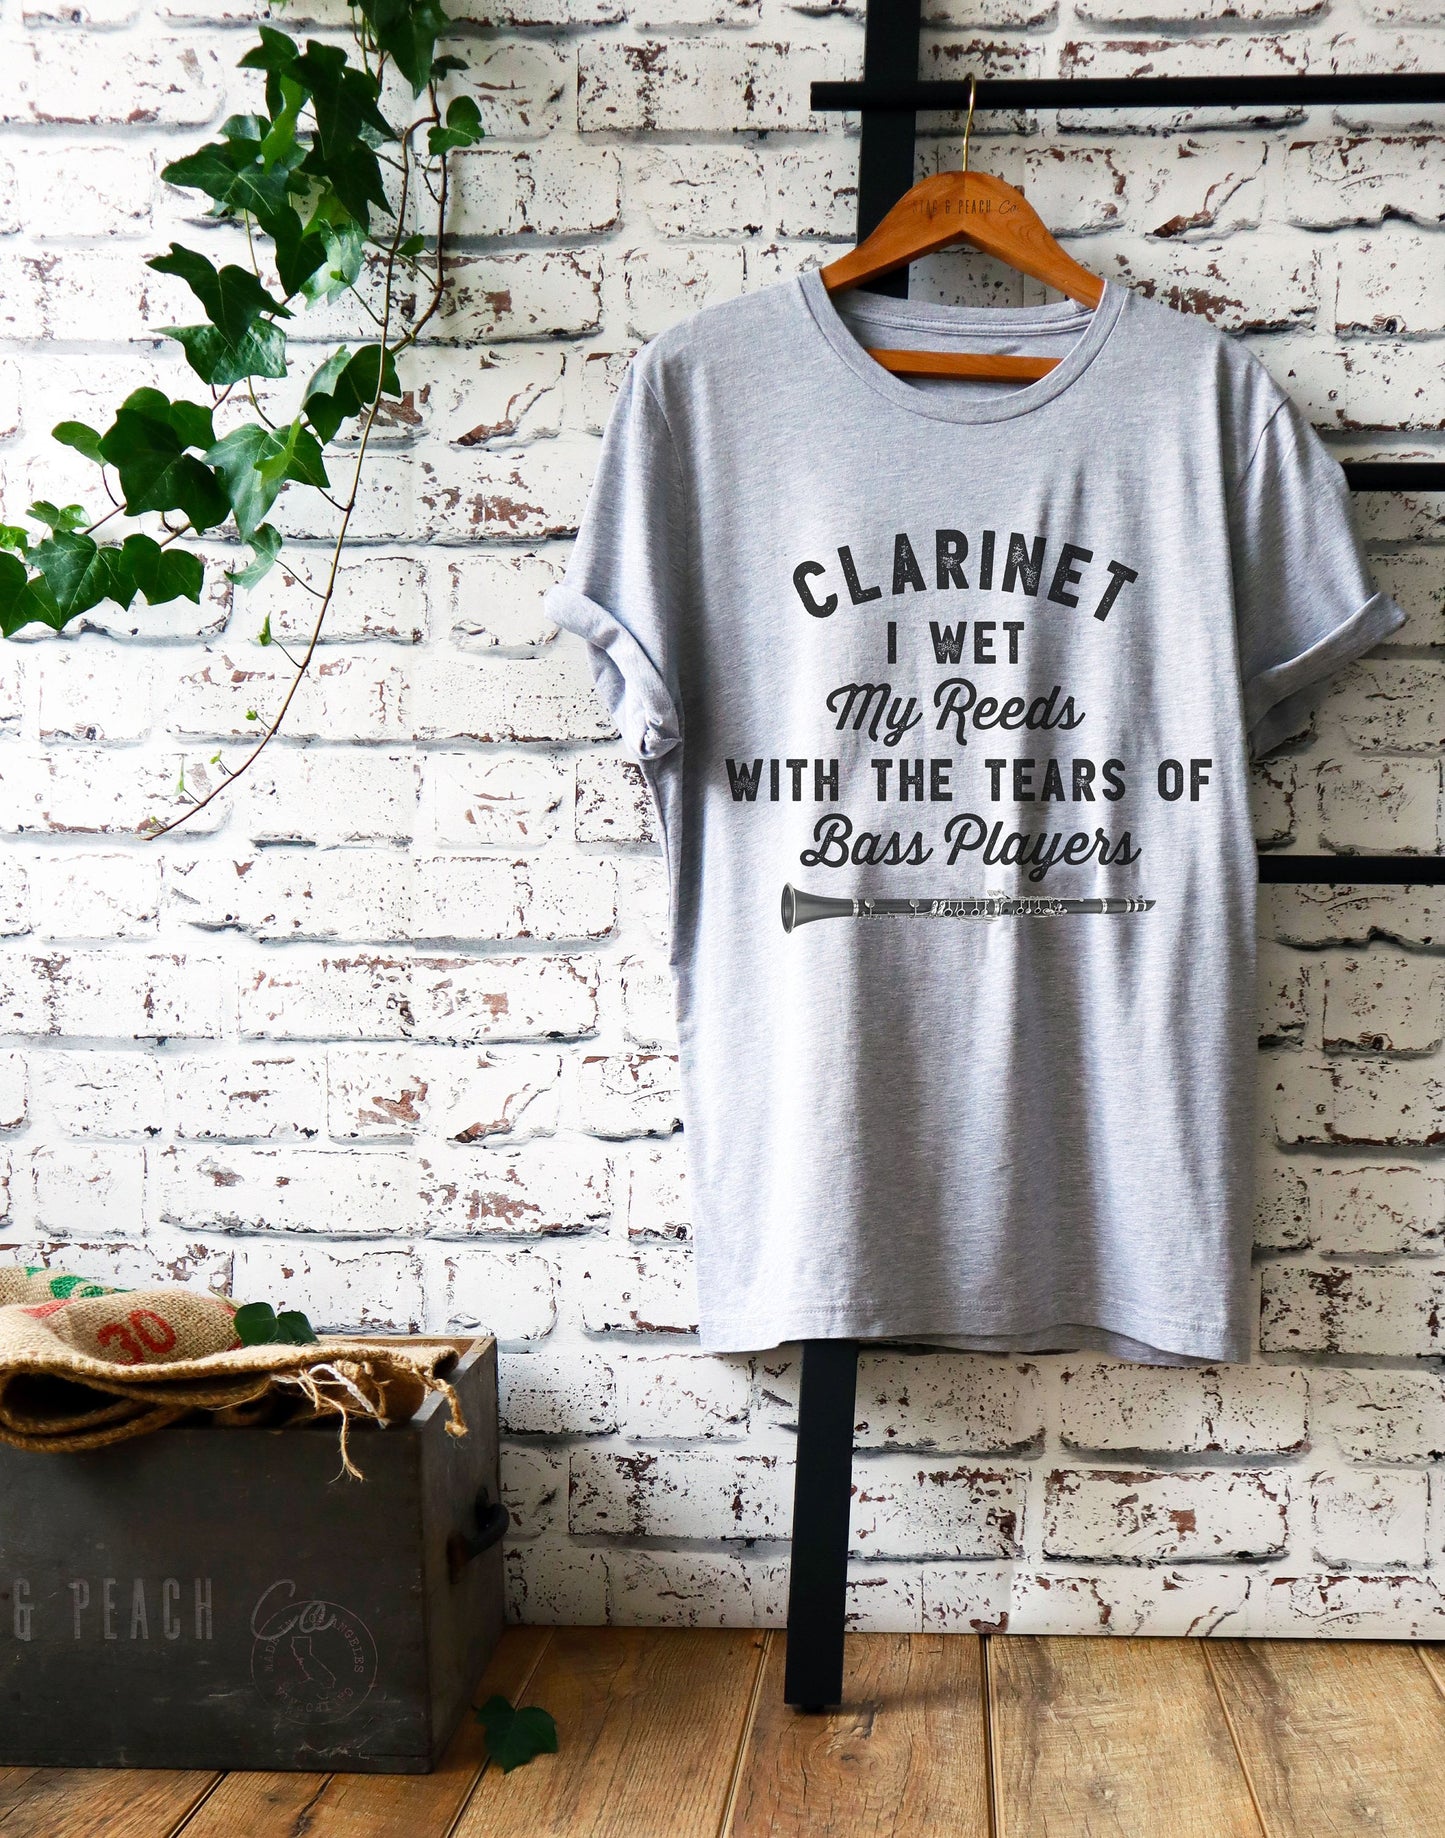 Clarinet I Wet My Reeds With The Tears Of Bass Players Unisex Shirt - Clarinet Shirt | Clarinet player | Clarinet gift | Bass clarinet